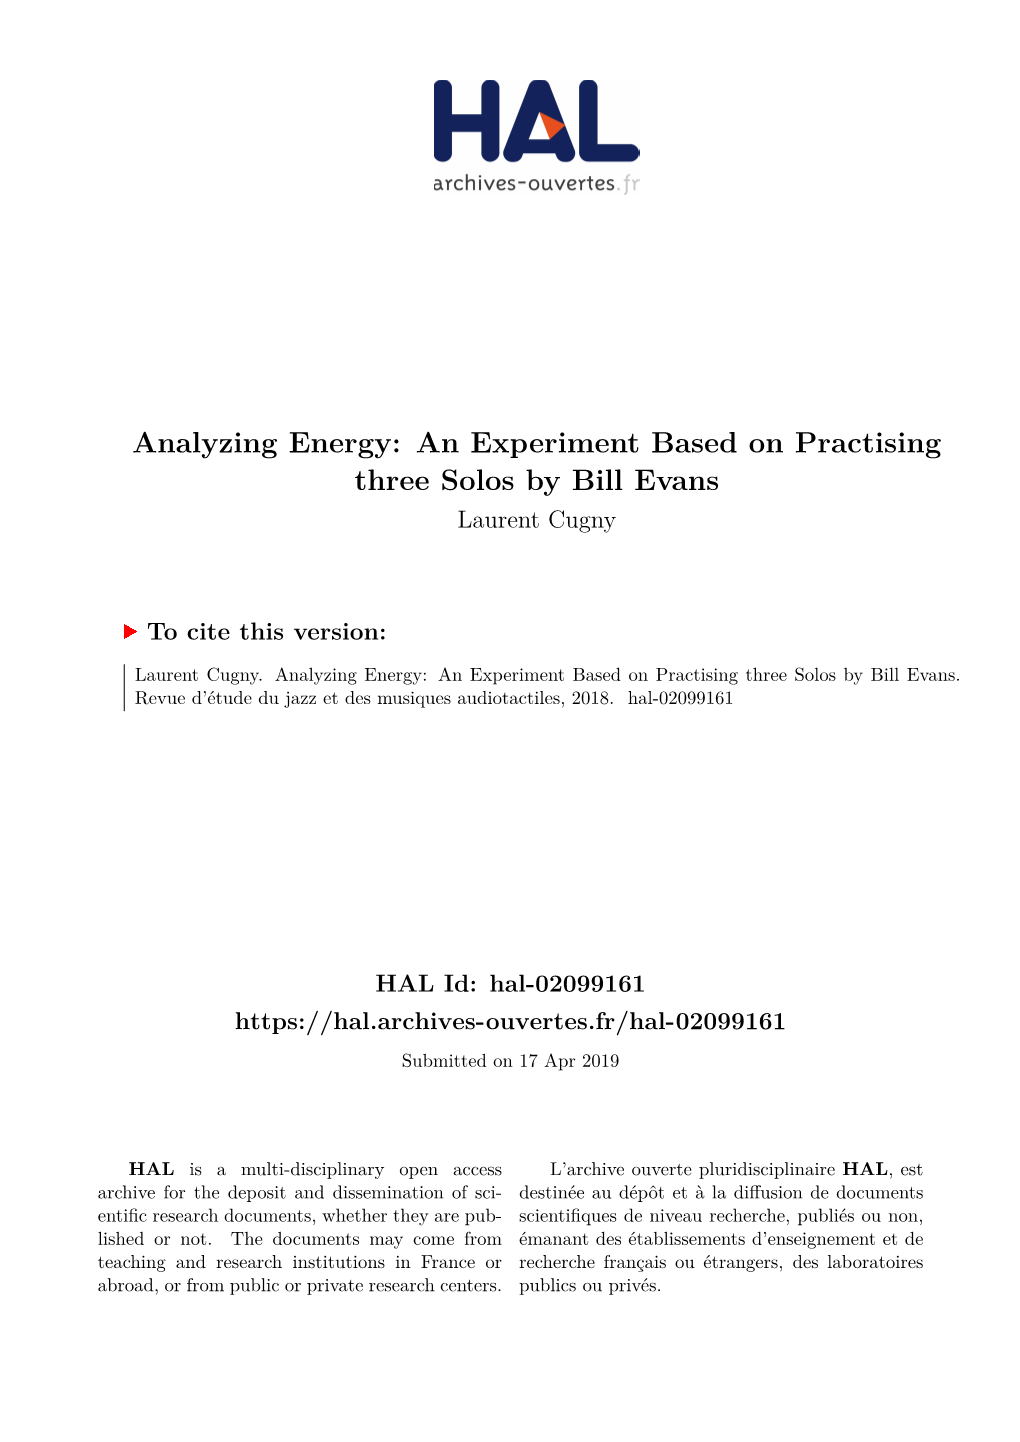 Analyzing Energy: an Experiment Based on Practising Three Solos by Bill Evans Laurent Cugny